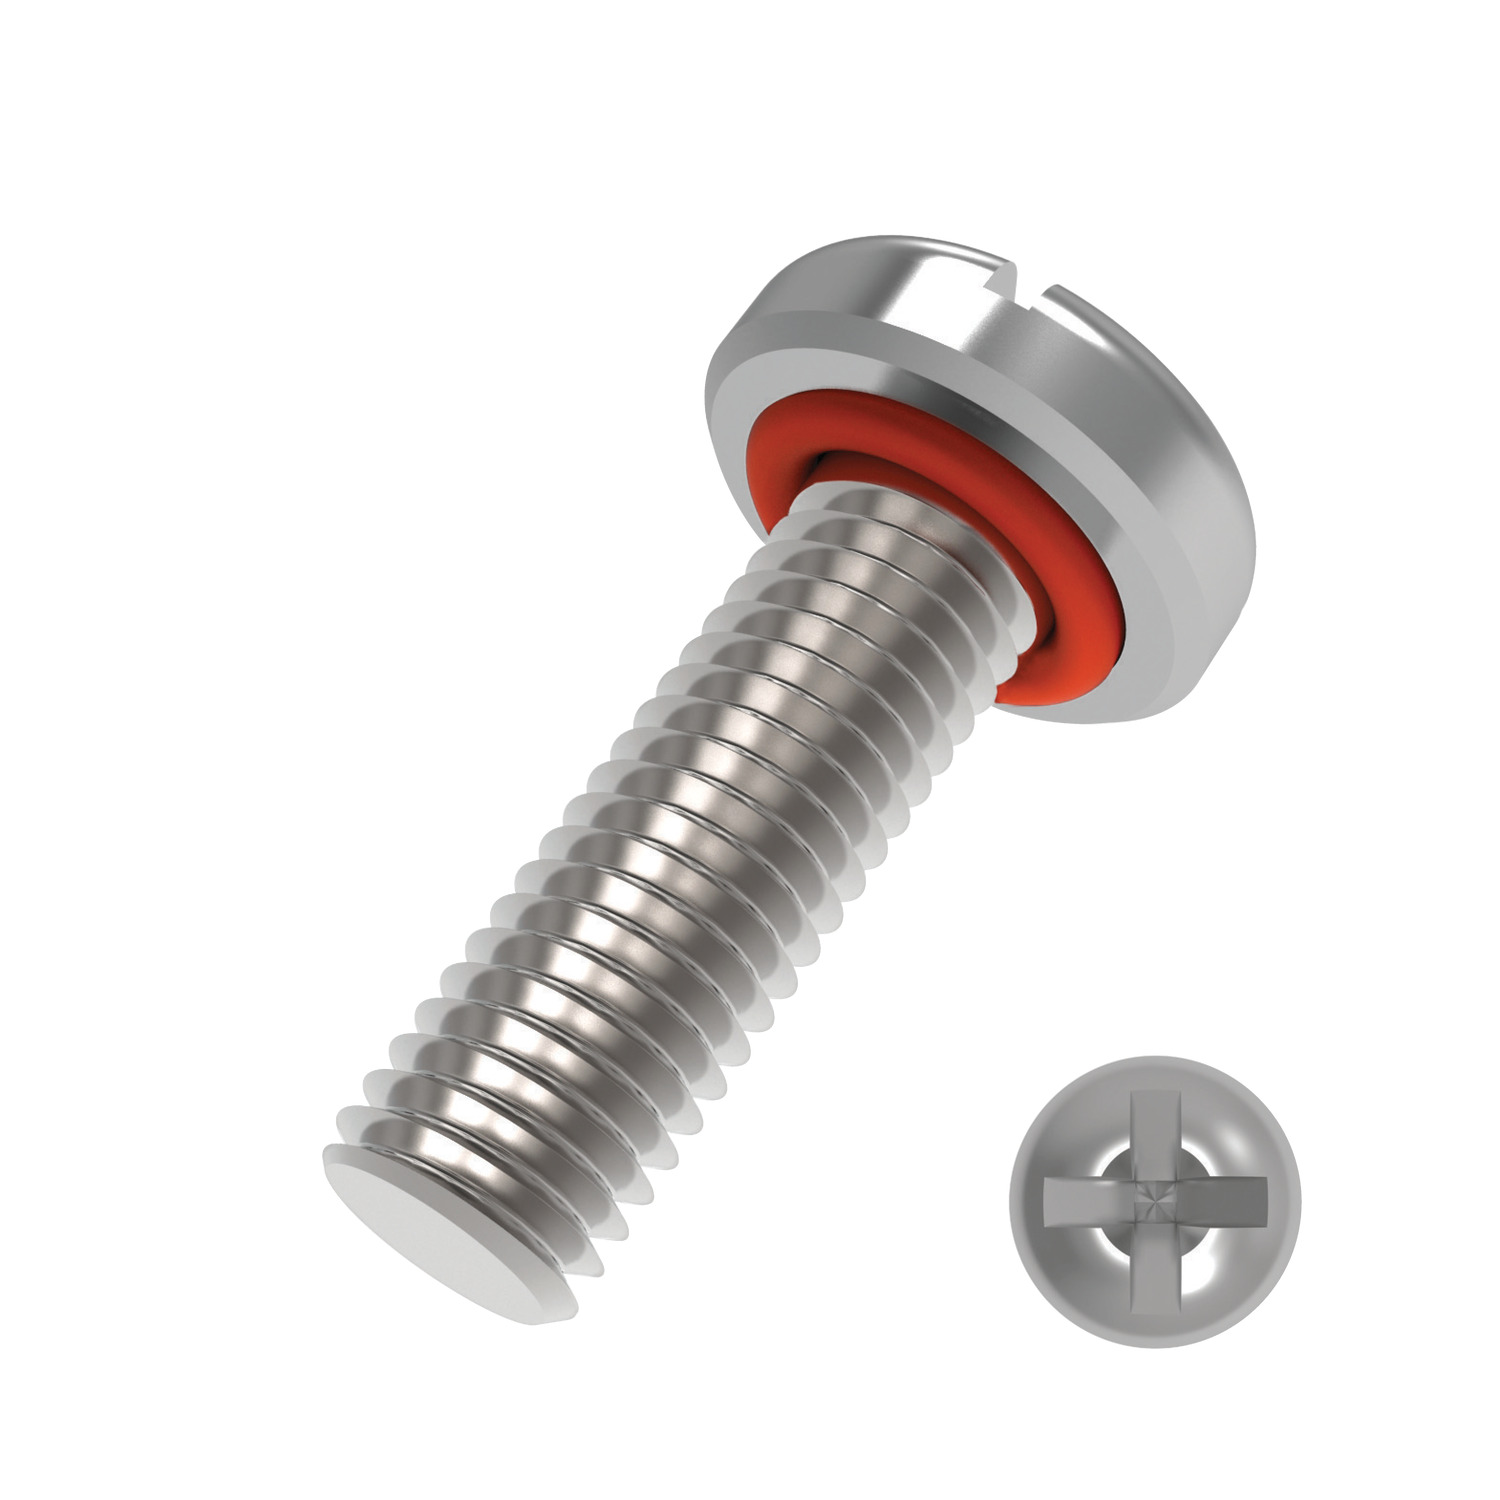 Pan Head Seal Screws Pan head integral sealing screws feature an O-ring underneath the screw to provide bi-direction sealing. This makes them for ideal for protection against contaminates such as a dirt.